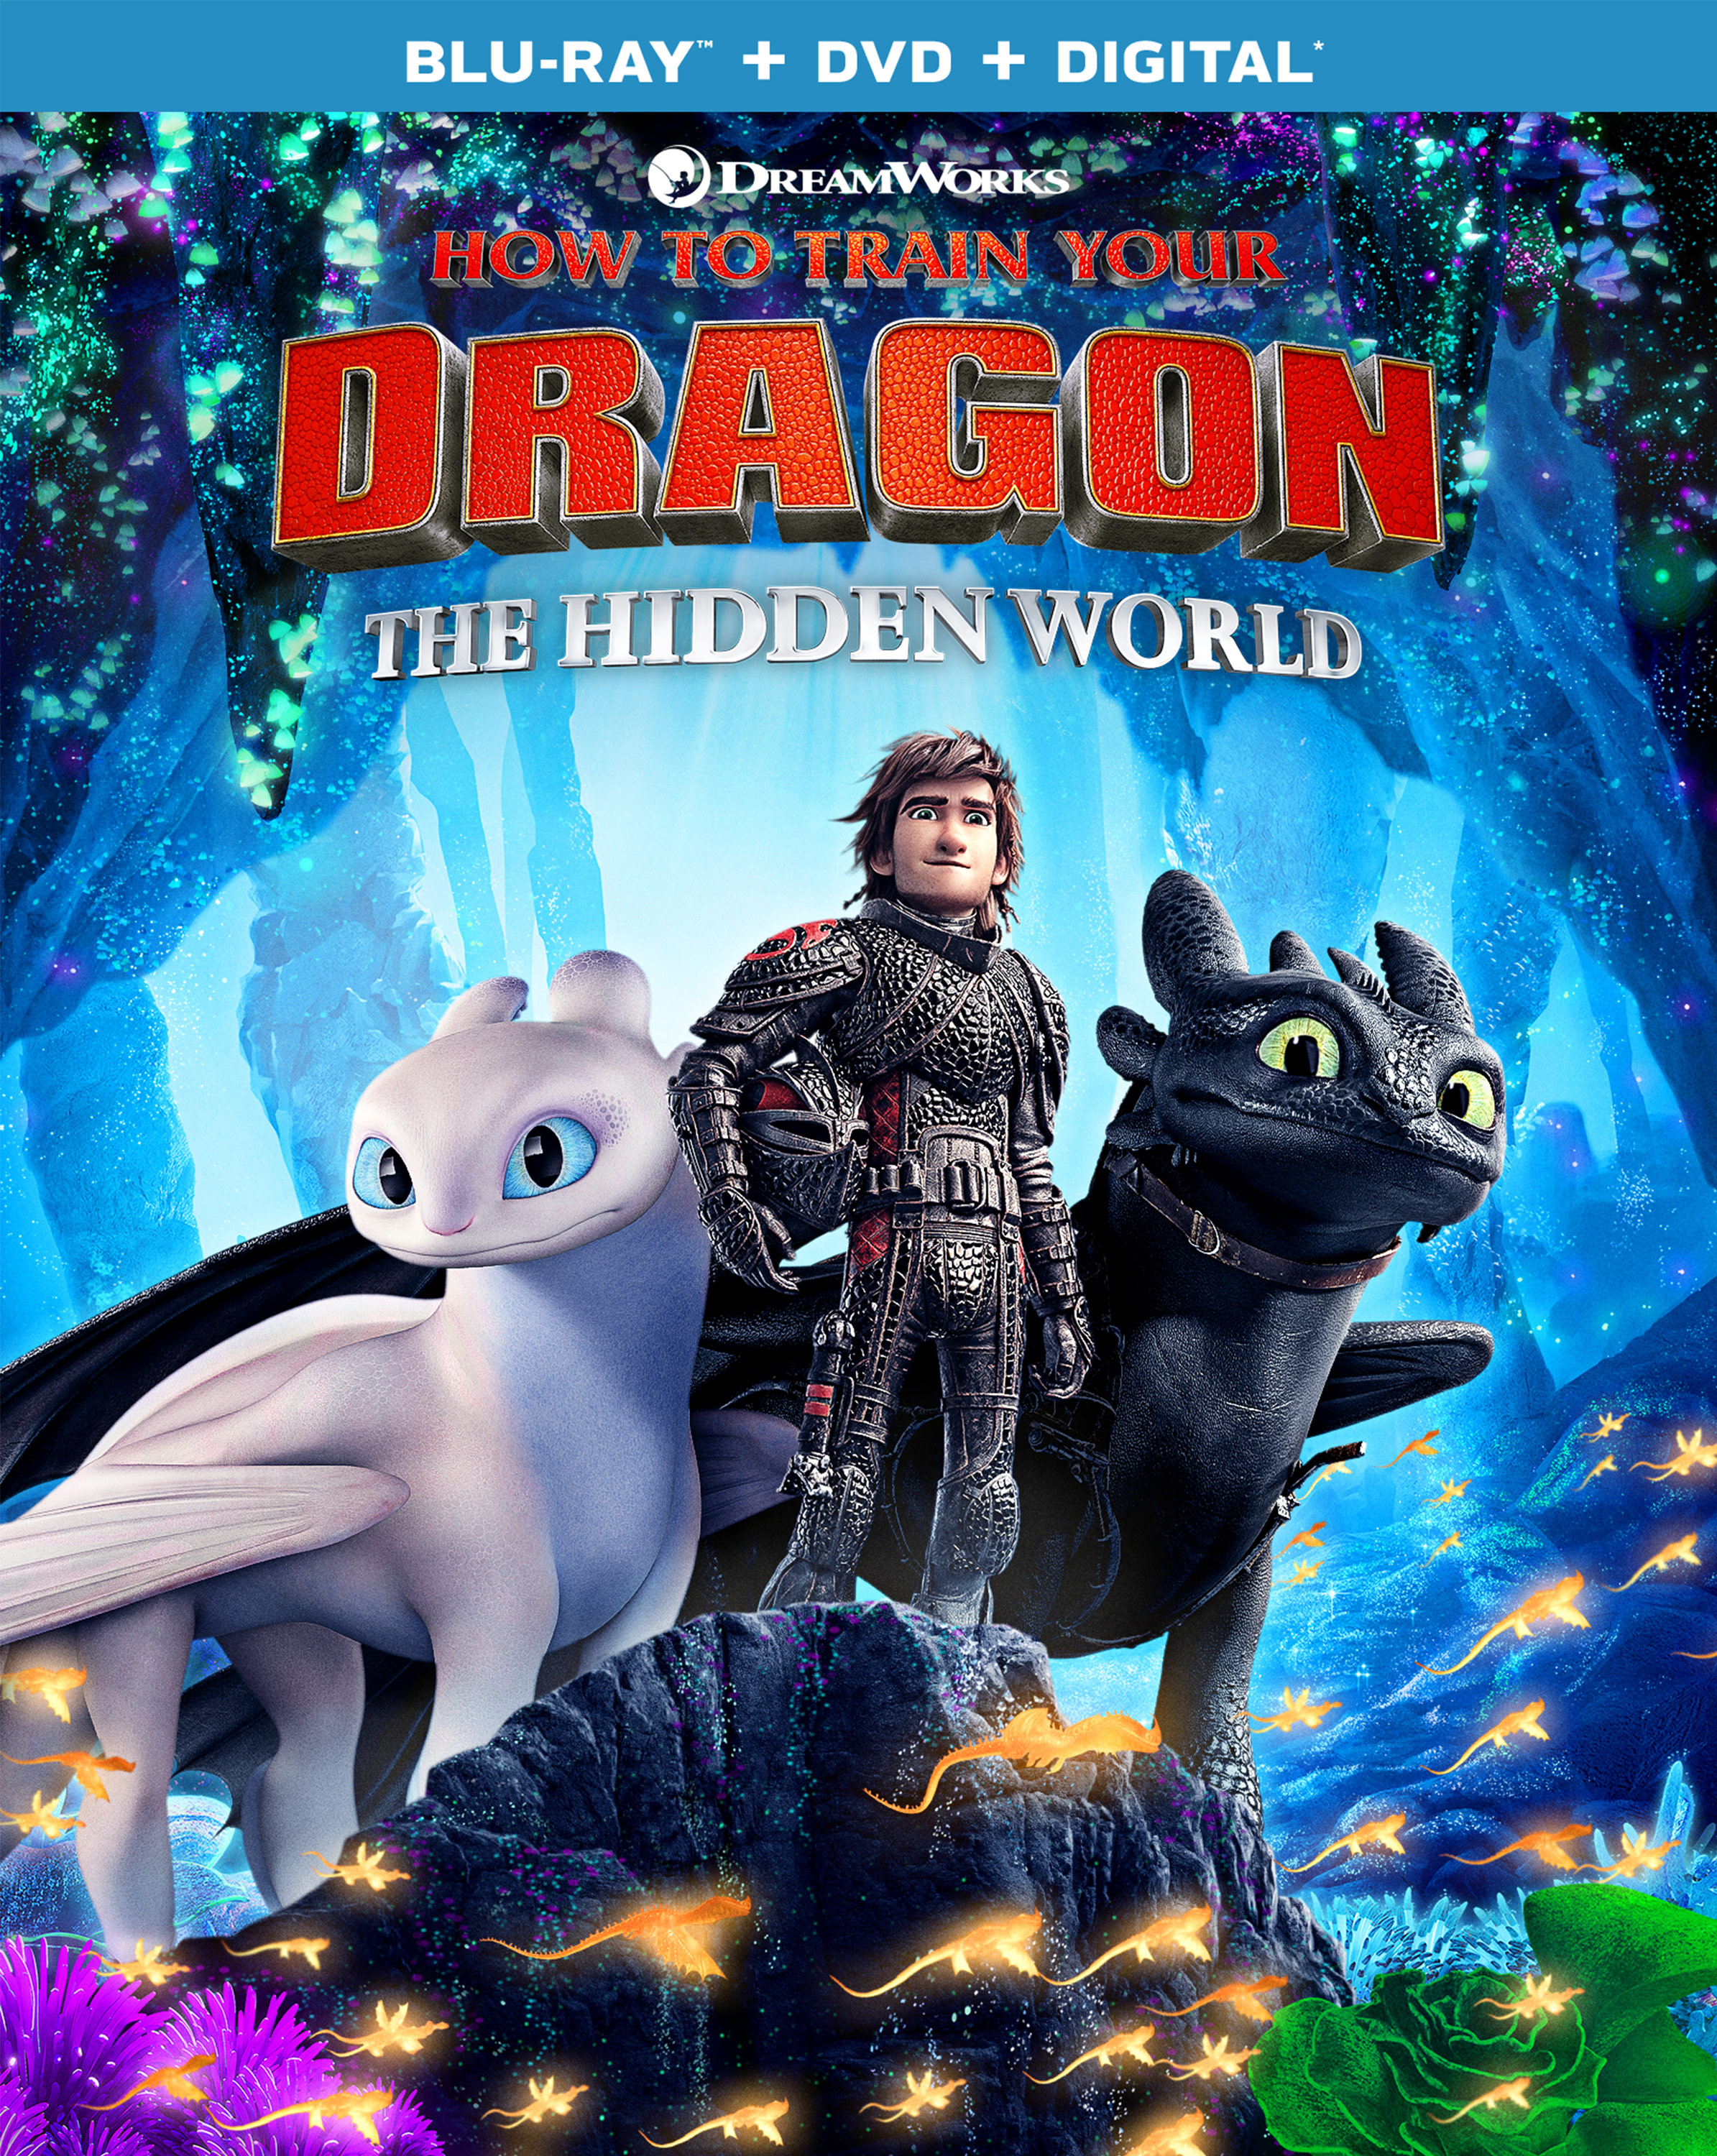 How to train your dragon the hidden world digital code How To Train Your Dragon The Hidden World Includes Digital Copy Blu Ray Dvd 2019 Best Buy